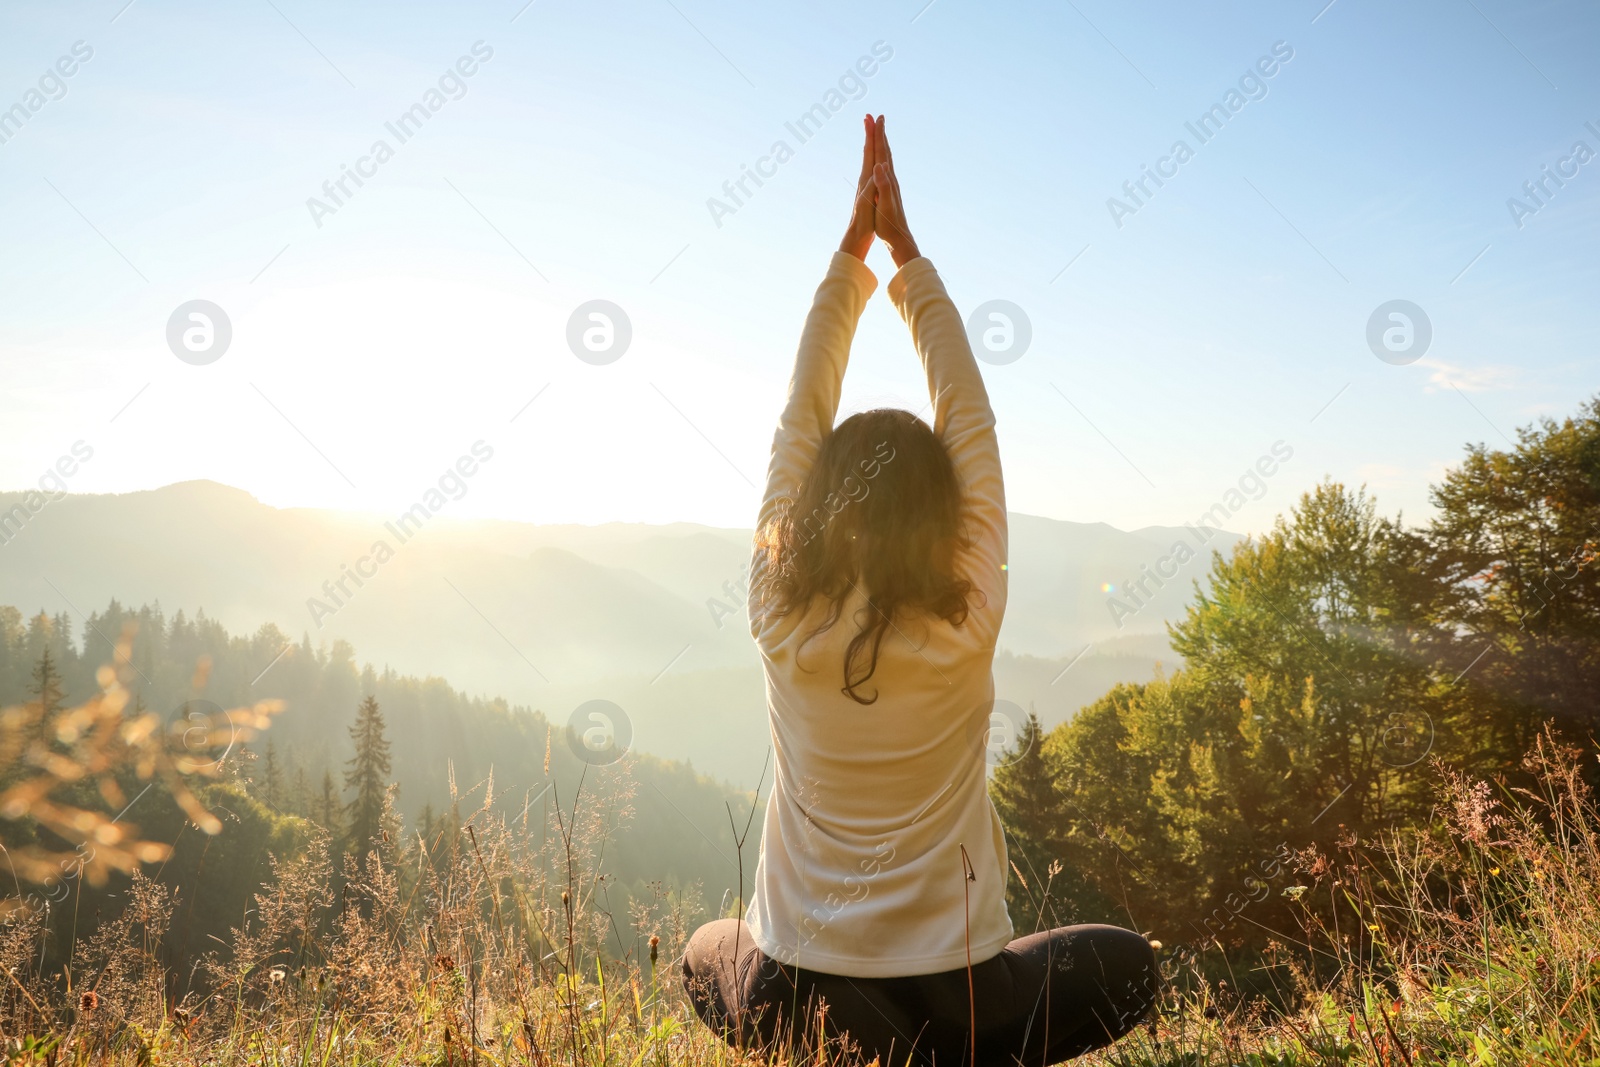 Photo of Woman practicing yoga in mountains at sunrise, back view